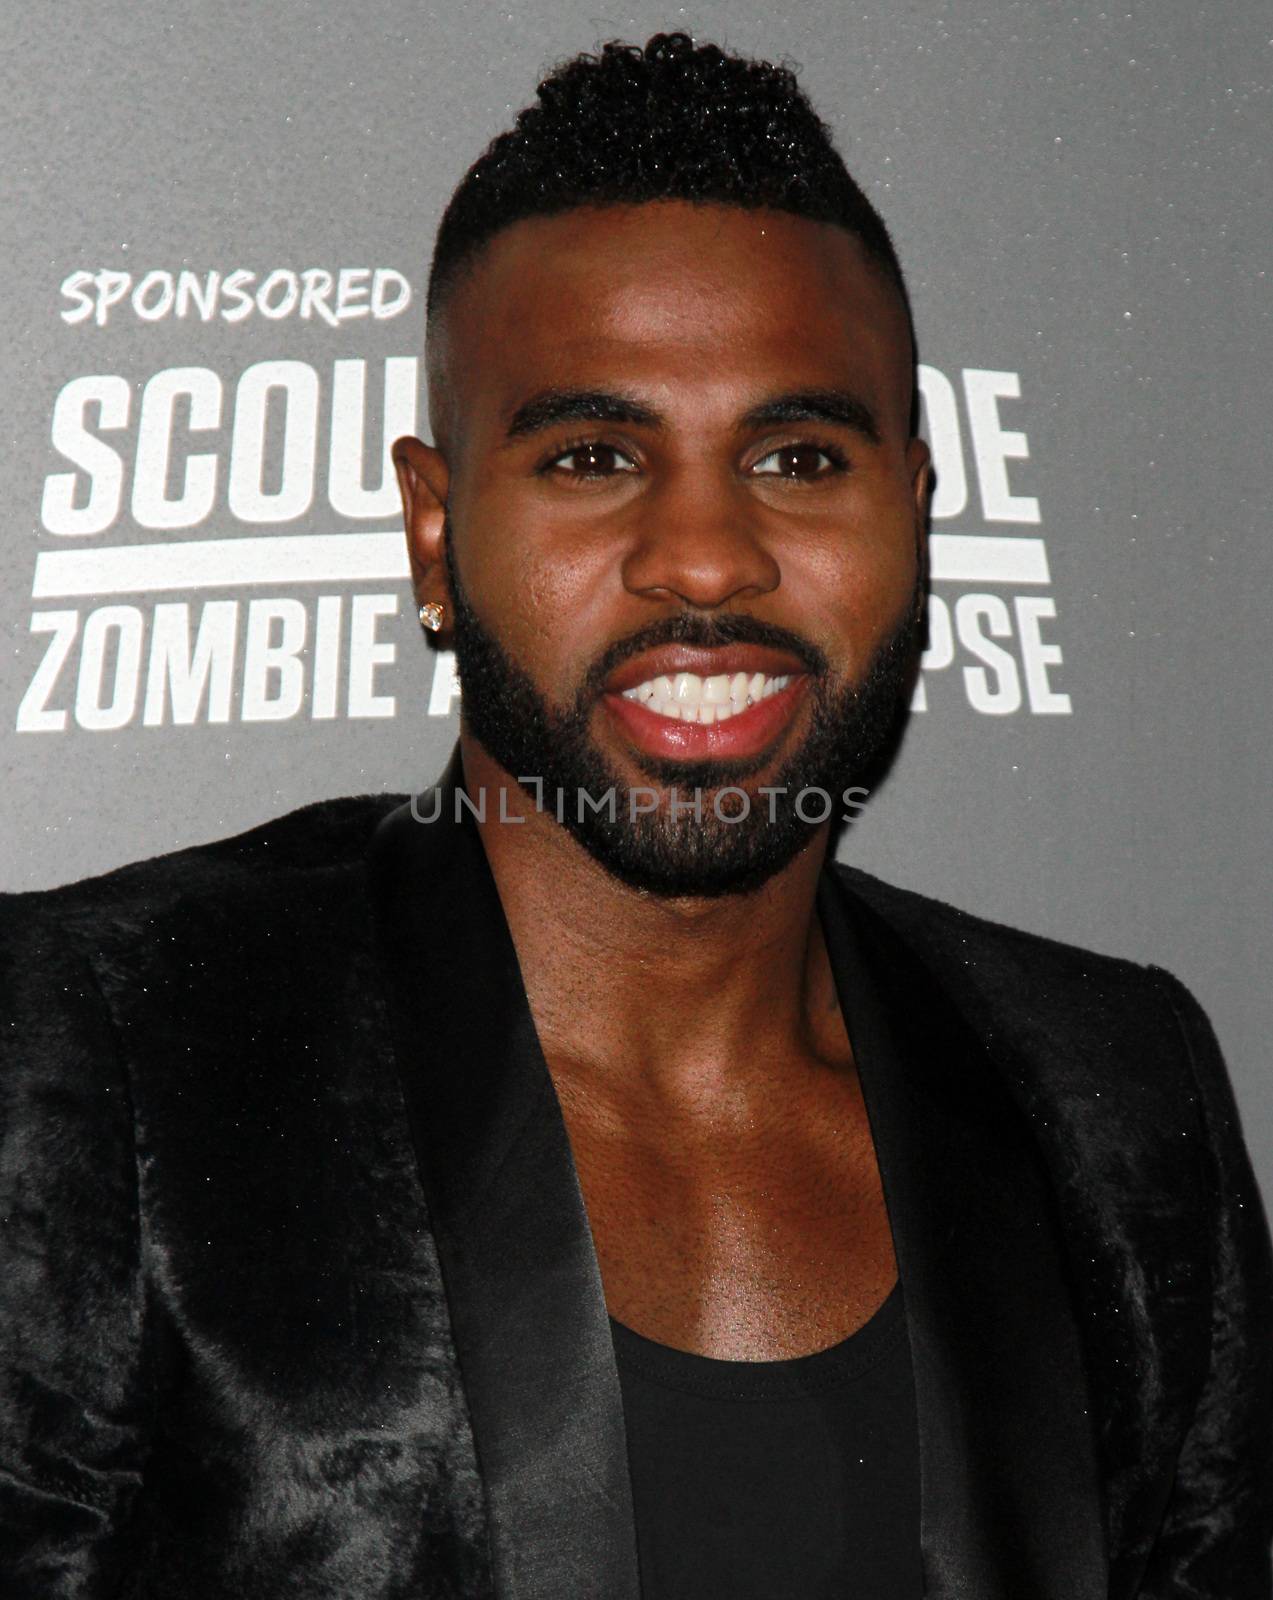 ENGLAND, London: Jason Derulo attended the Kiss FM Haunted House Party in London on October 29, 2015. Costumes ranging from the Rock band KISS to the devil were on display as various stars walked the red carpet at the party which featured musical performances by Rita Ora, Jason Derulo and band Little Mix.